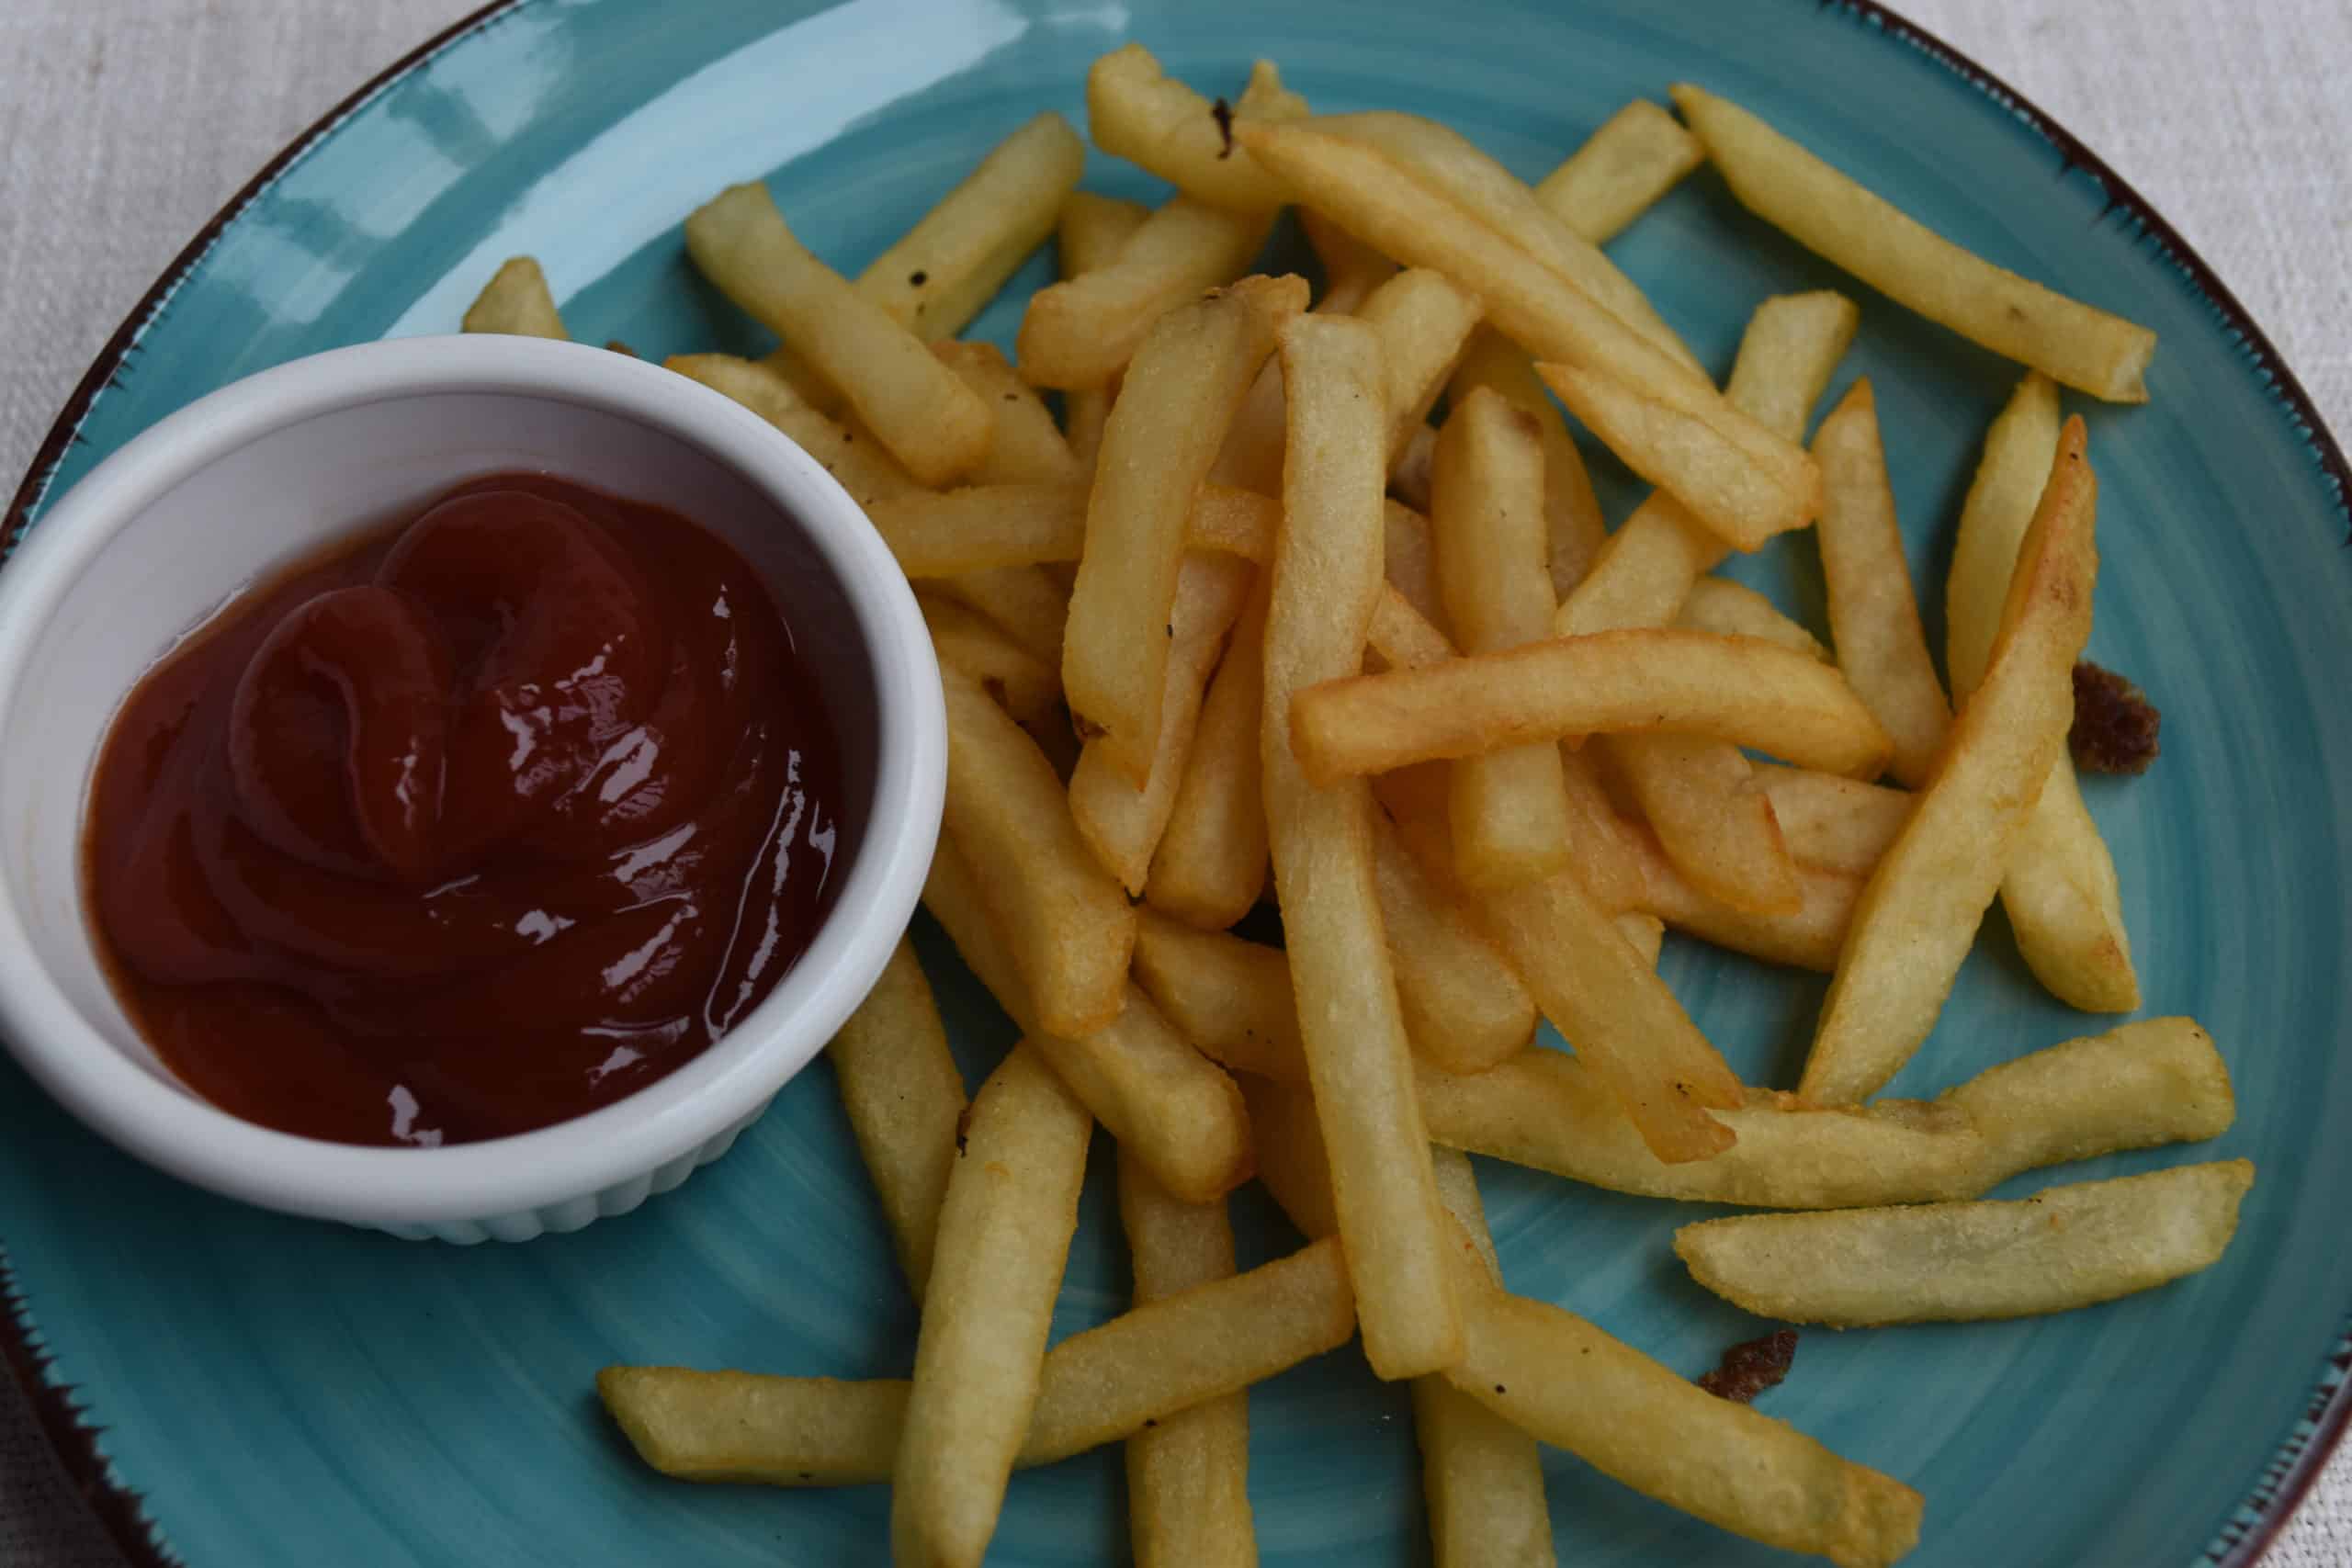 Blackstone Griddle Deep-Fried Frozen Fries on a plate with a cup of ketchup.